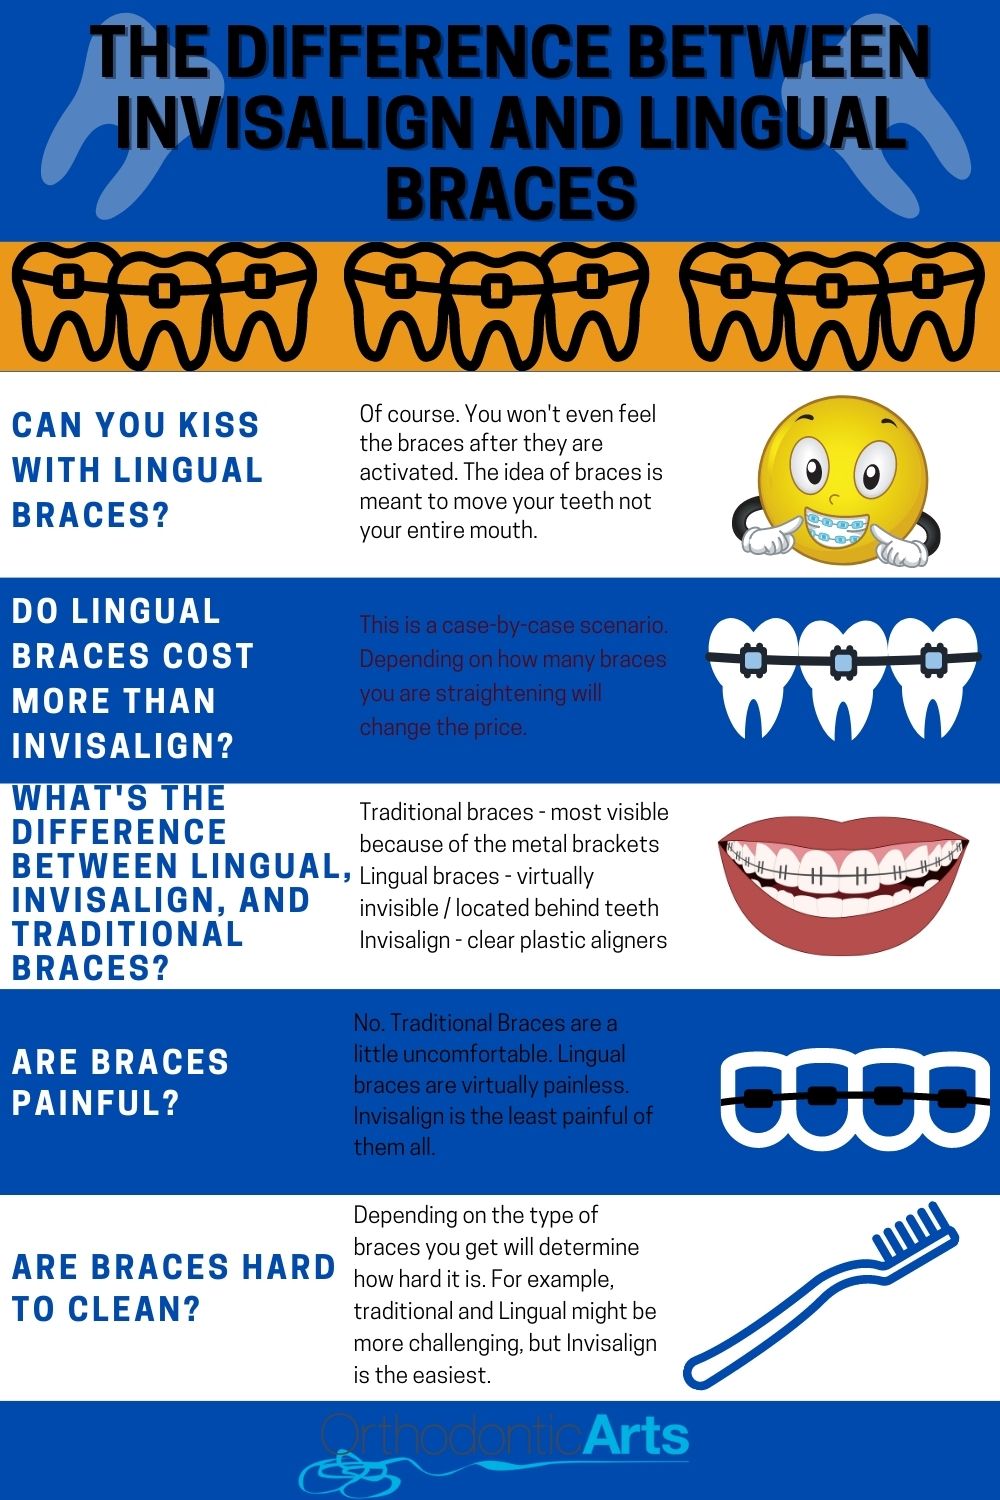 Invisalign vs lingual braces and traditional braces infographic. 